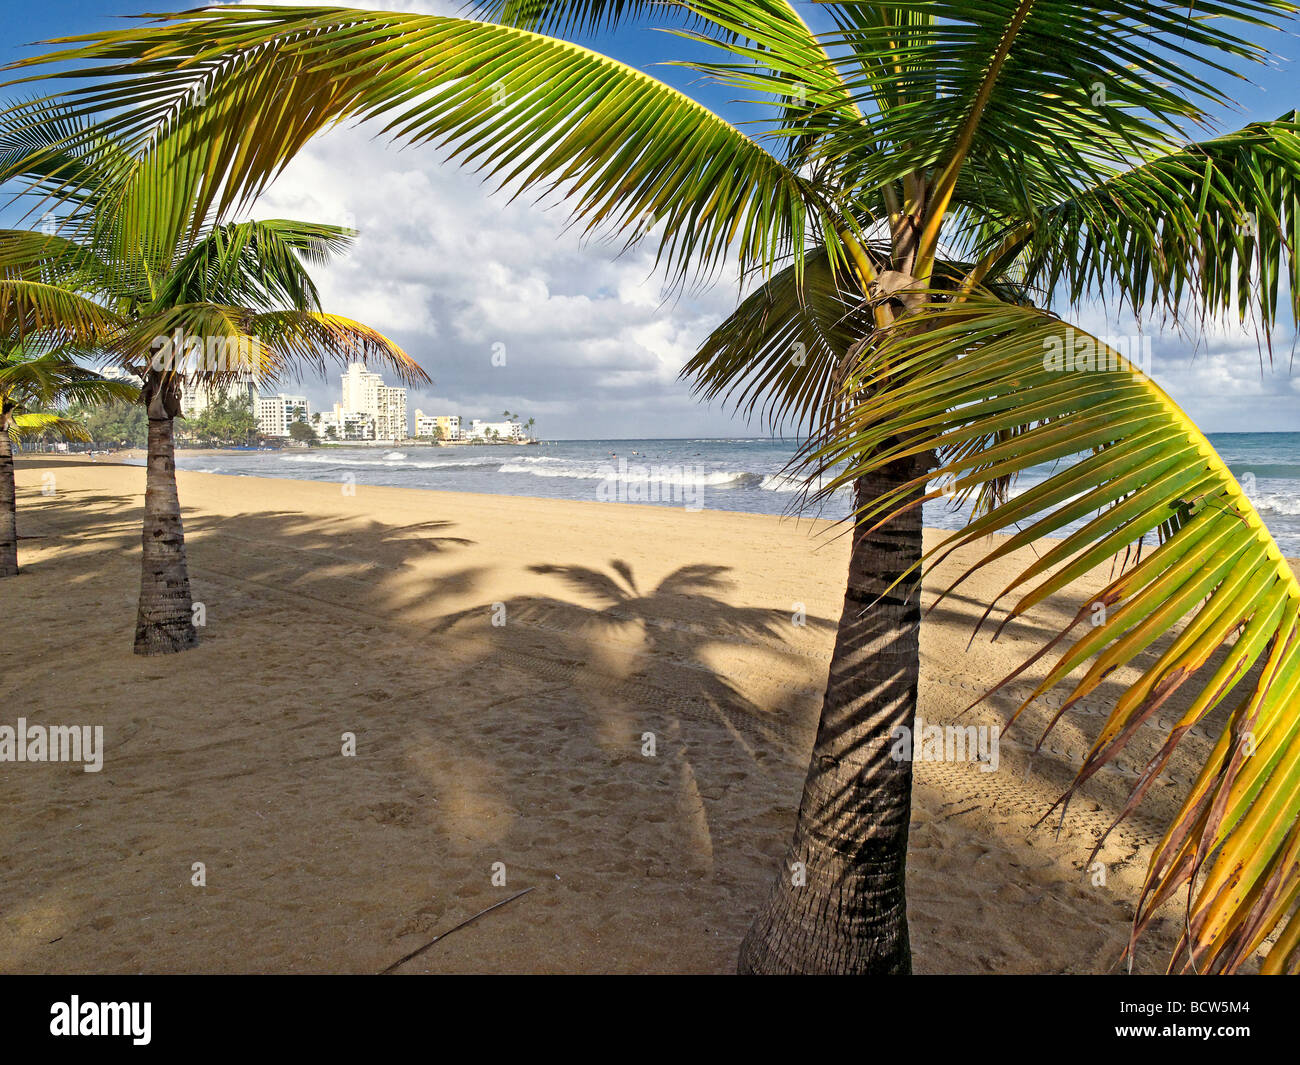 View of a Palm Covered Beach with City Skyline, Isla Verde, Puerto Rico Stock Photo